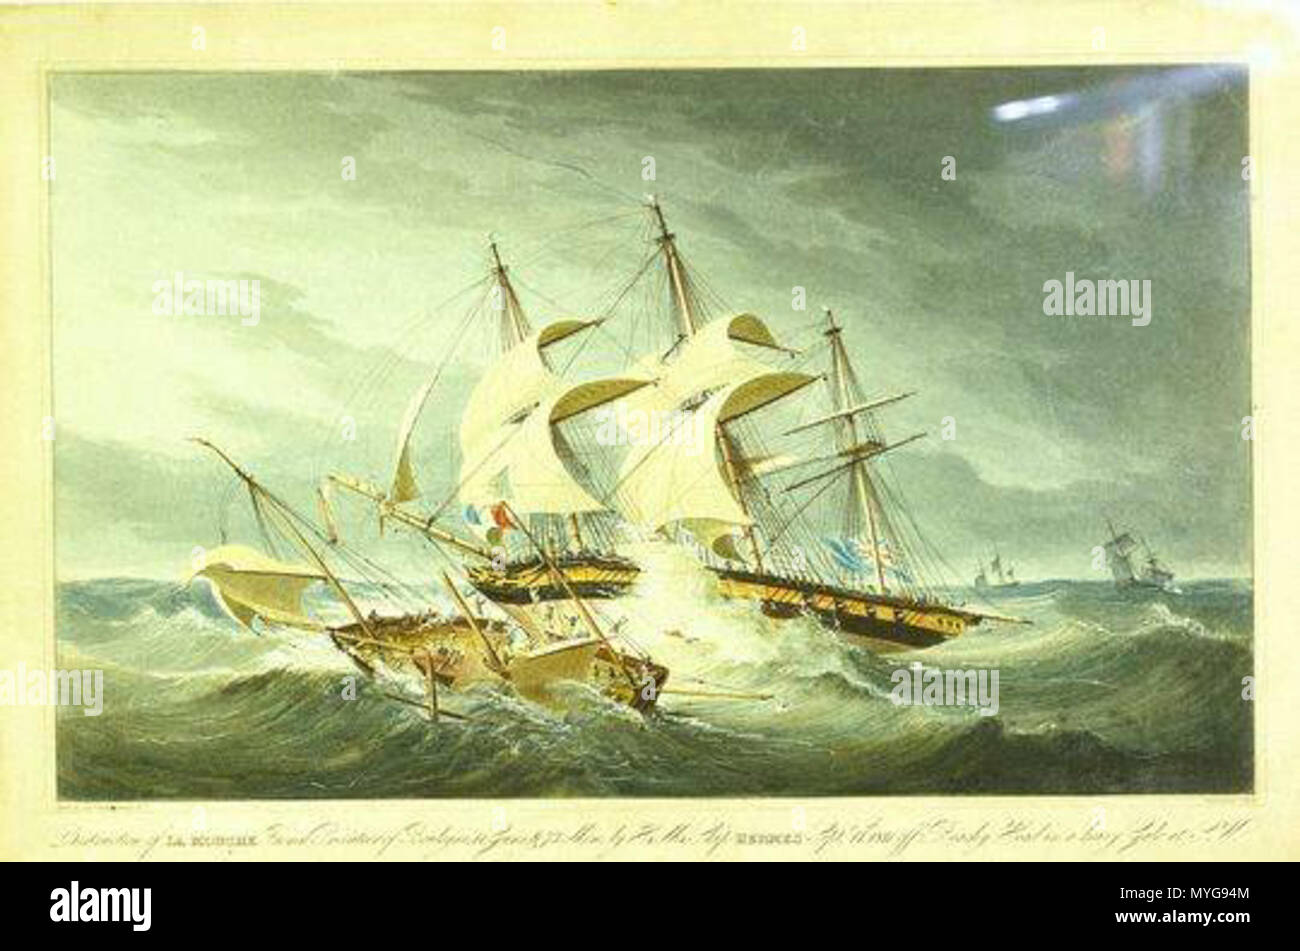 English: Destruction of La Mouche French Privateer of Boulogne.... by H.M.  Ship Hermes Septr 14th 1811 off Beachy Head in a heavy Gale. Unknown date.  Capt. Phillip Brown (artist), and I.